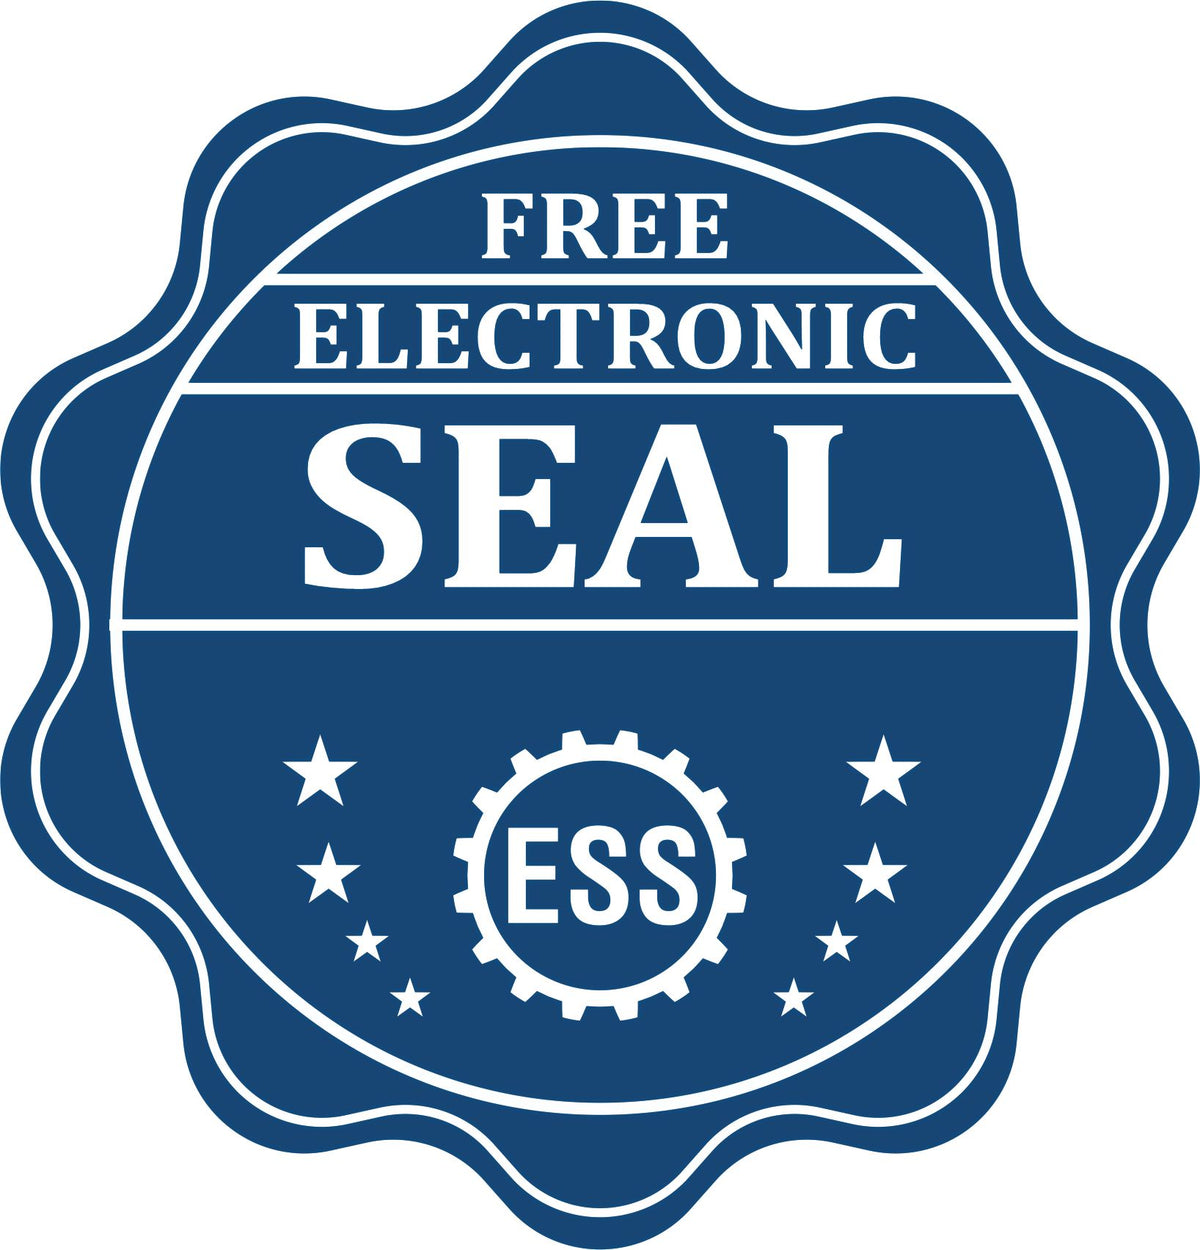 A badge showing a free electronic seal for the Michigan Desk Architect Embossing Seal with stars and the ESS gear on the emblem.